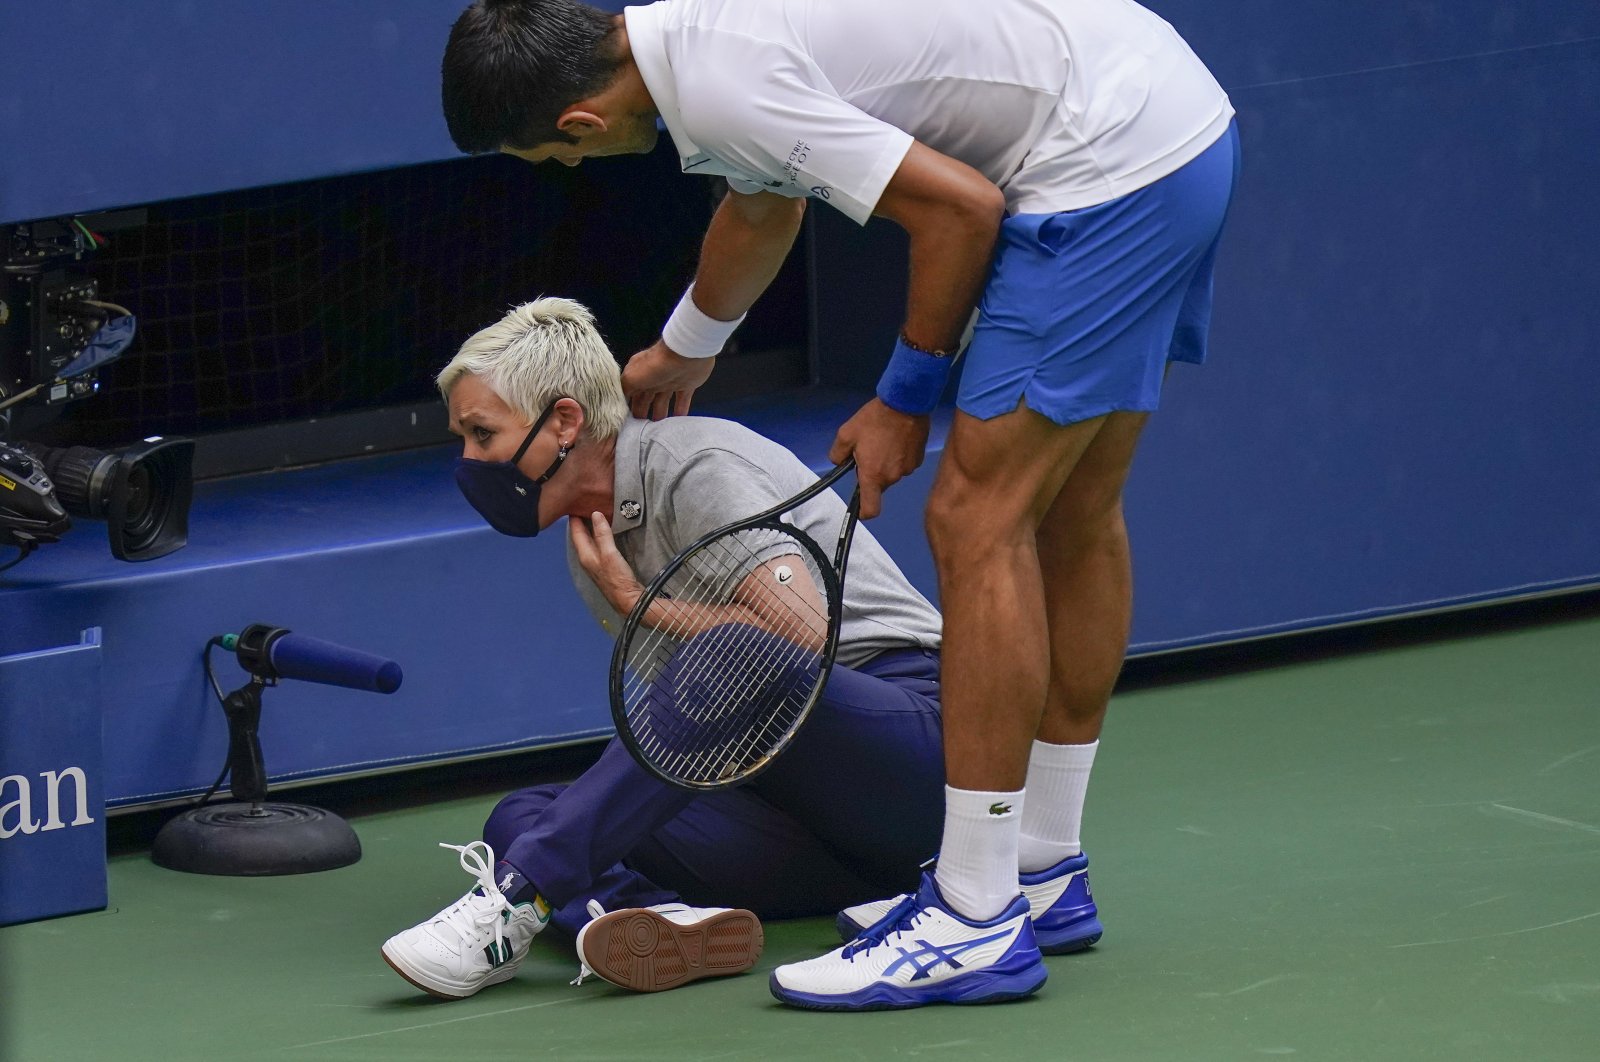 Novak Djokovic checks a linesman after hitting her with a ball in reaction to losing a point during the fourth round of the U.S Open, in New York, U.S., Sept. 6, 2020. (AP Photo)